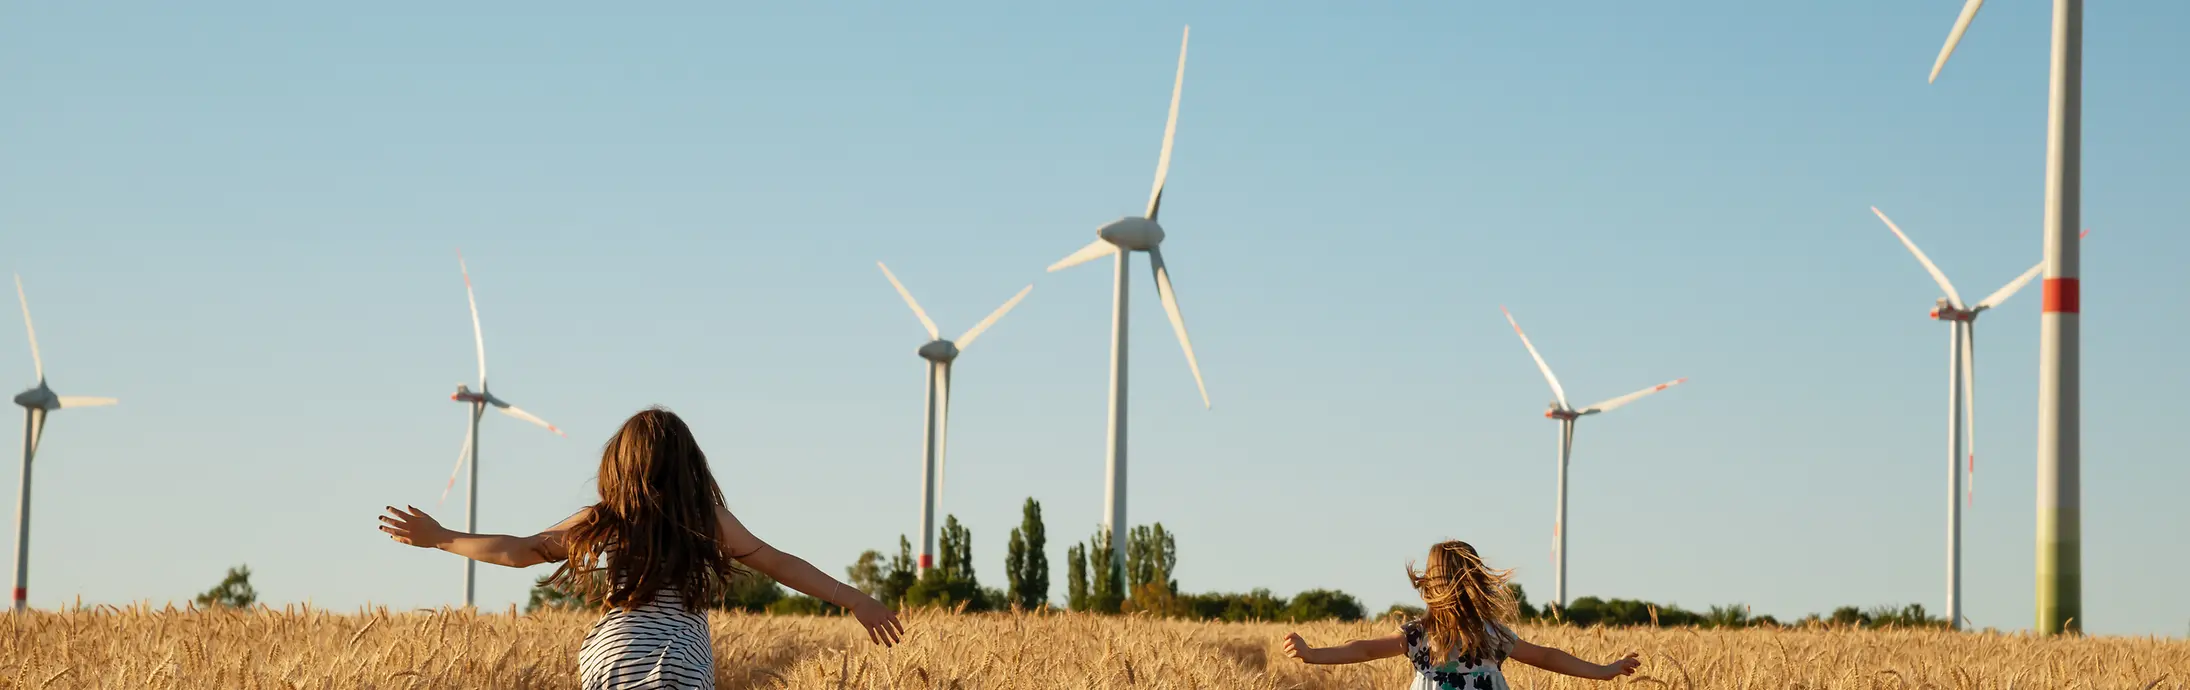 2 girls running in a cornfield with modern windmills in the background